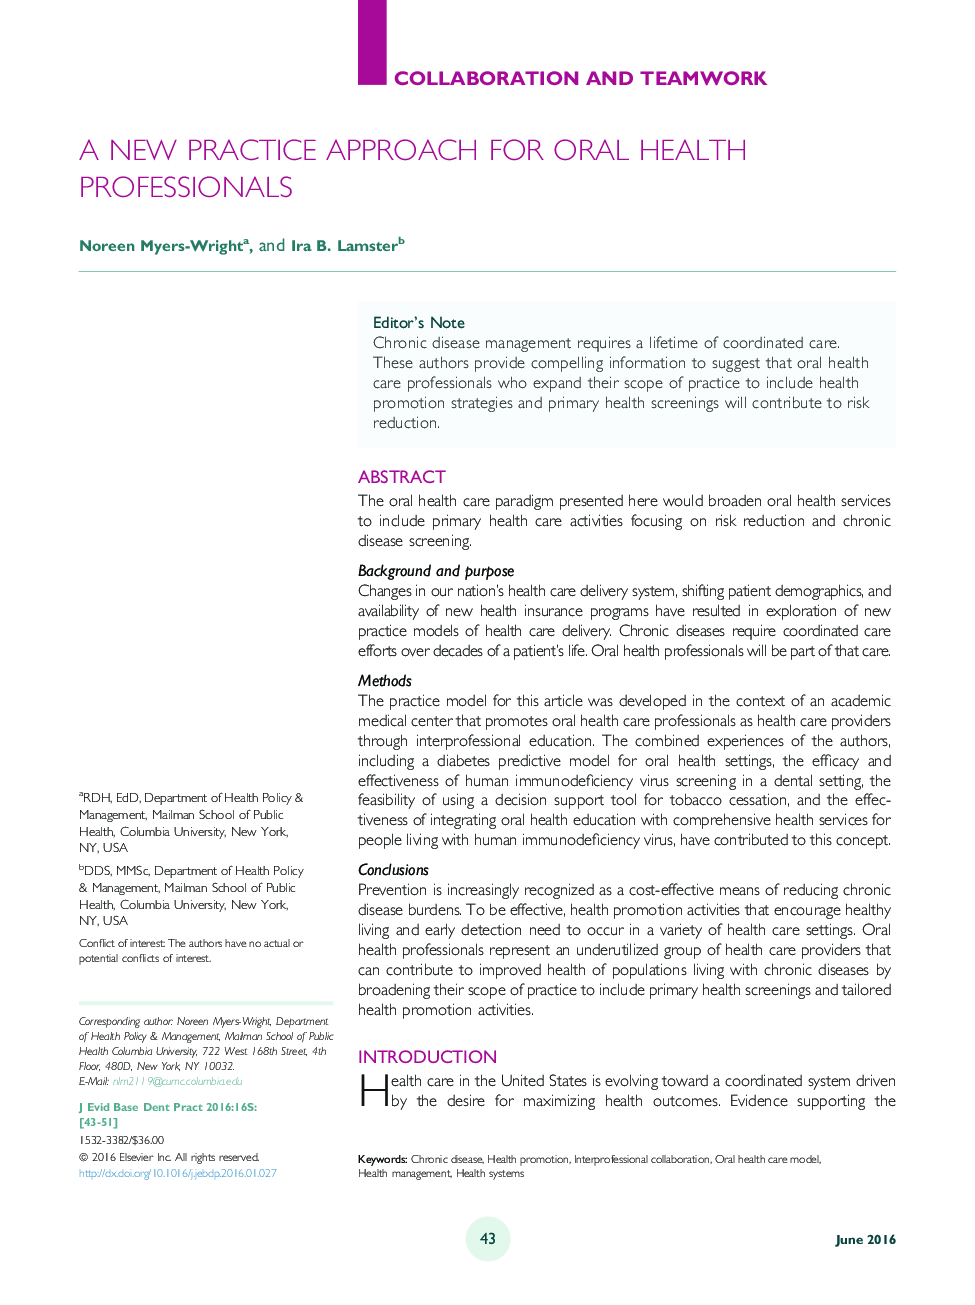 A New Practice Approach for Oral Health Professionals